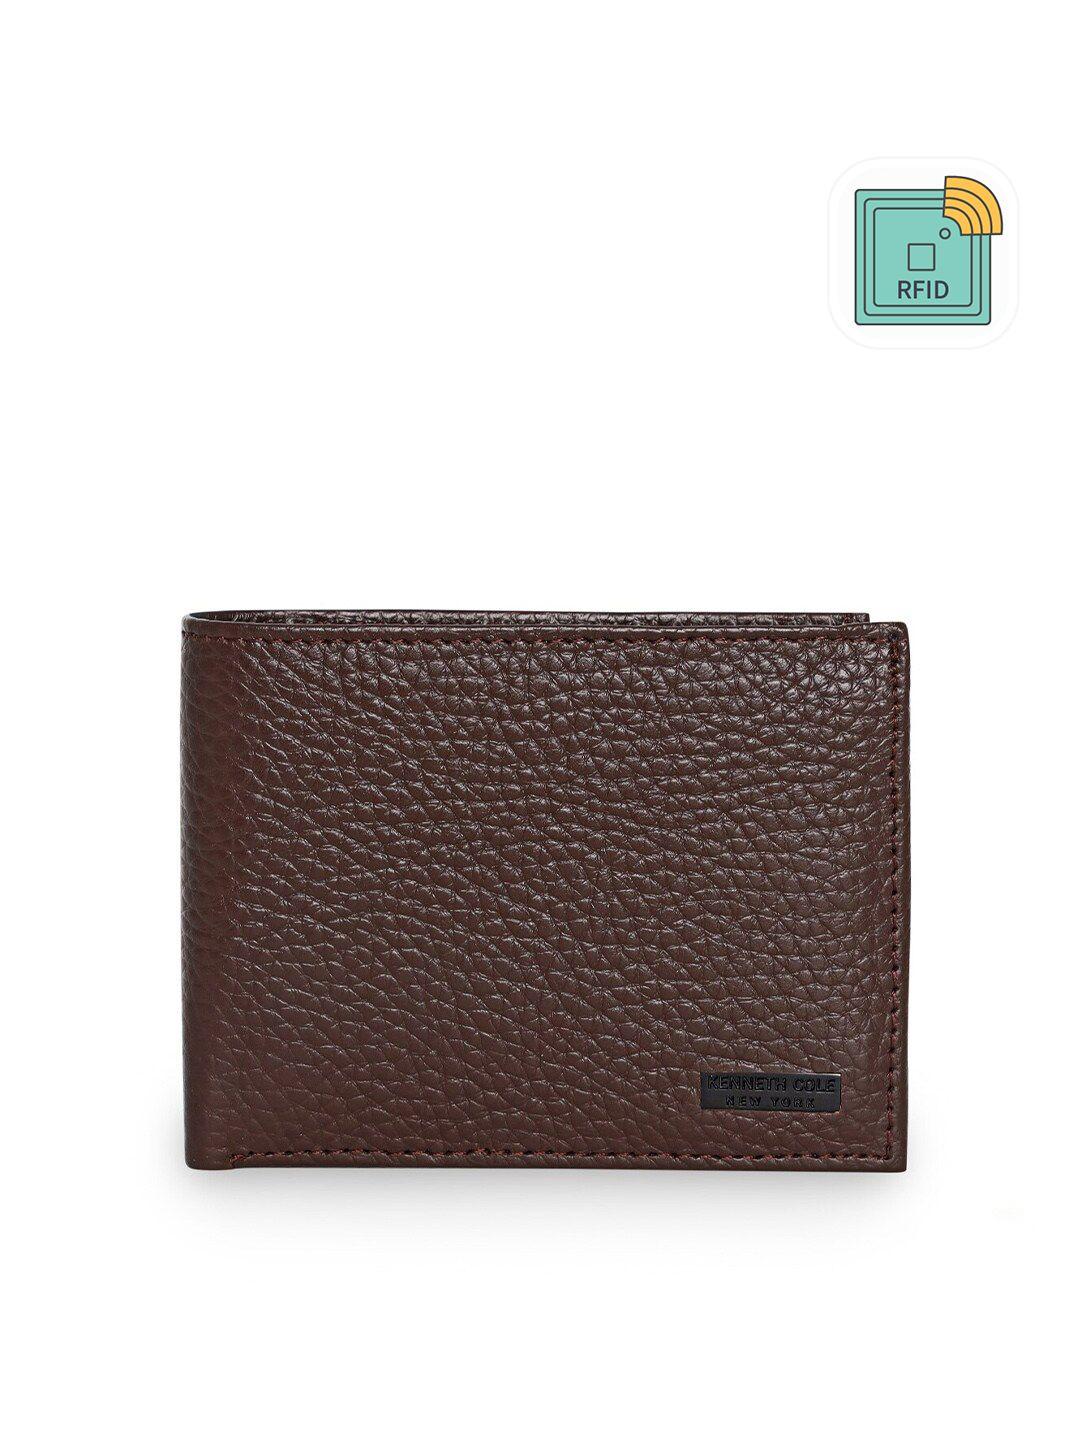 kenneth cole men brown textured leather two fold wallet with rfid